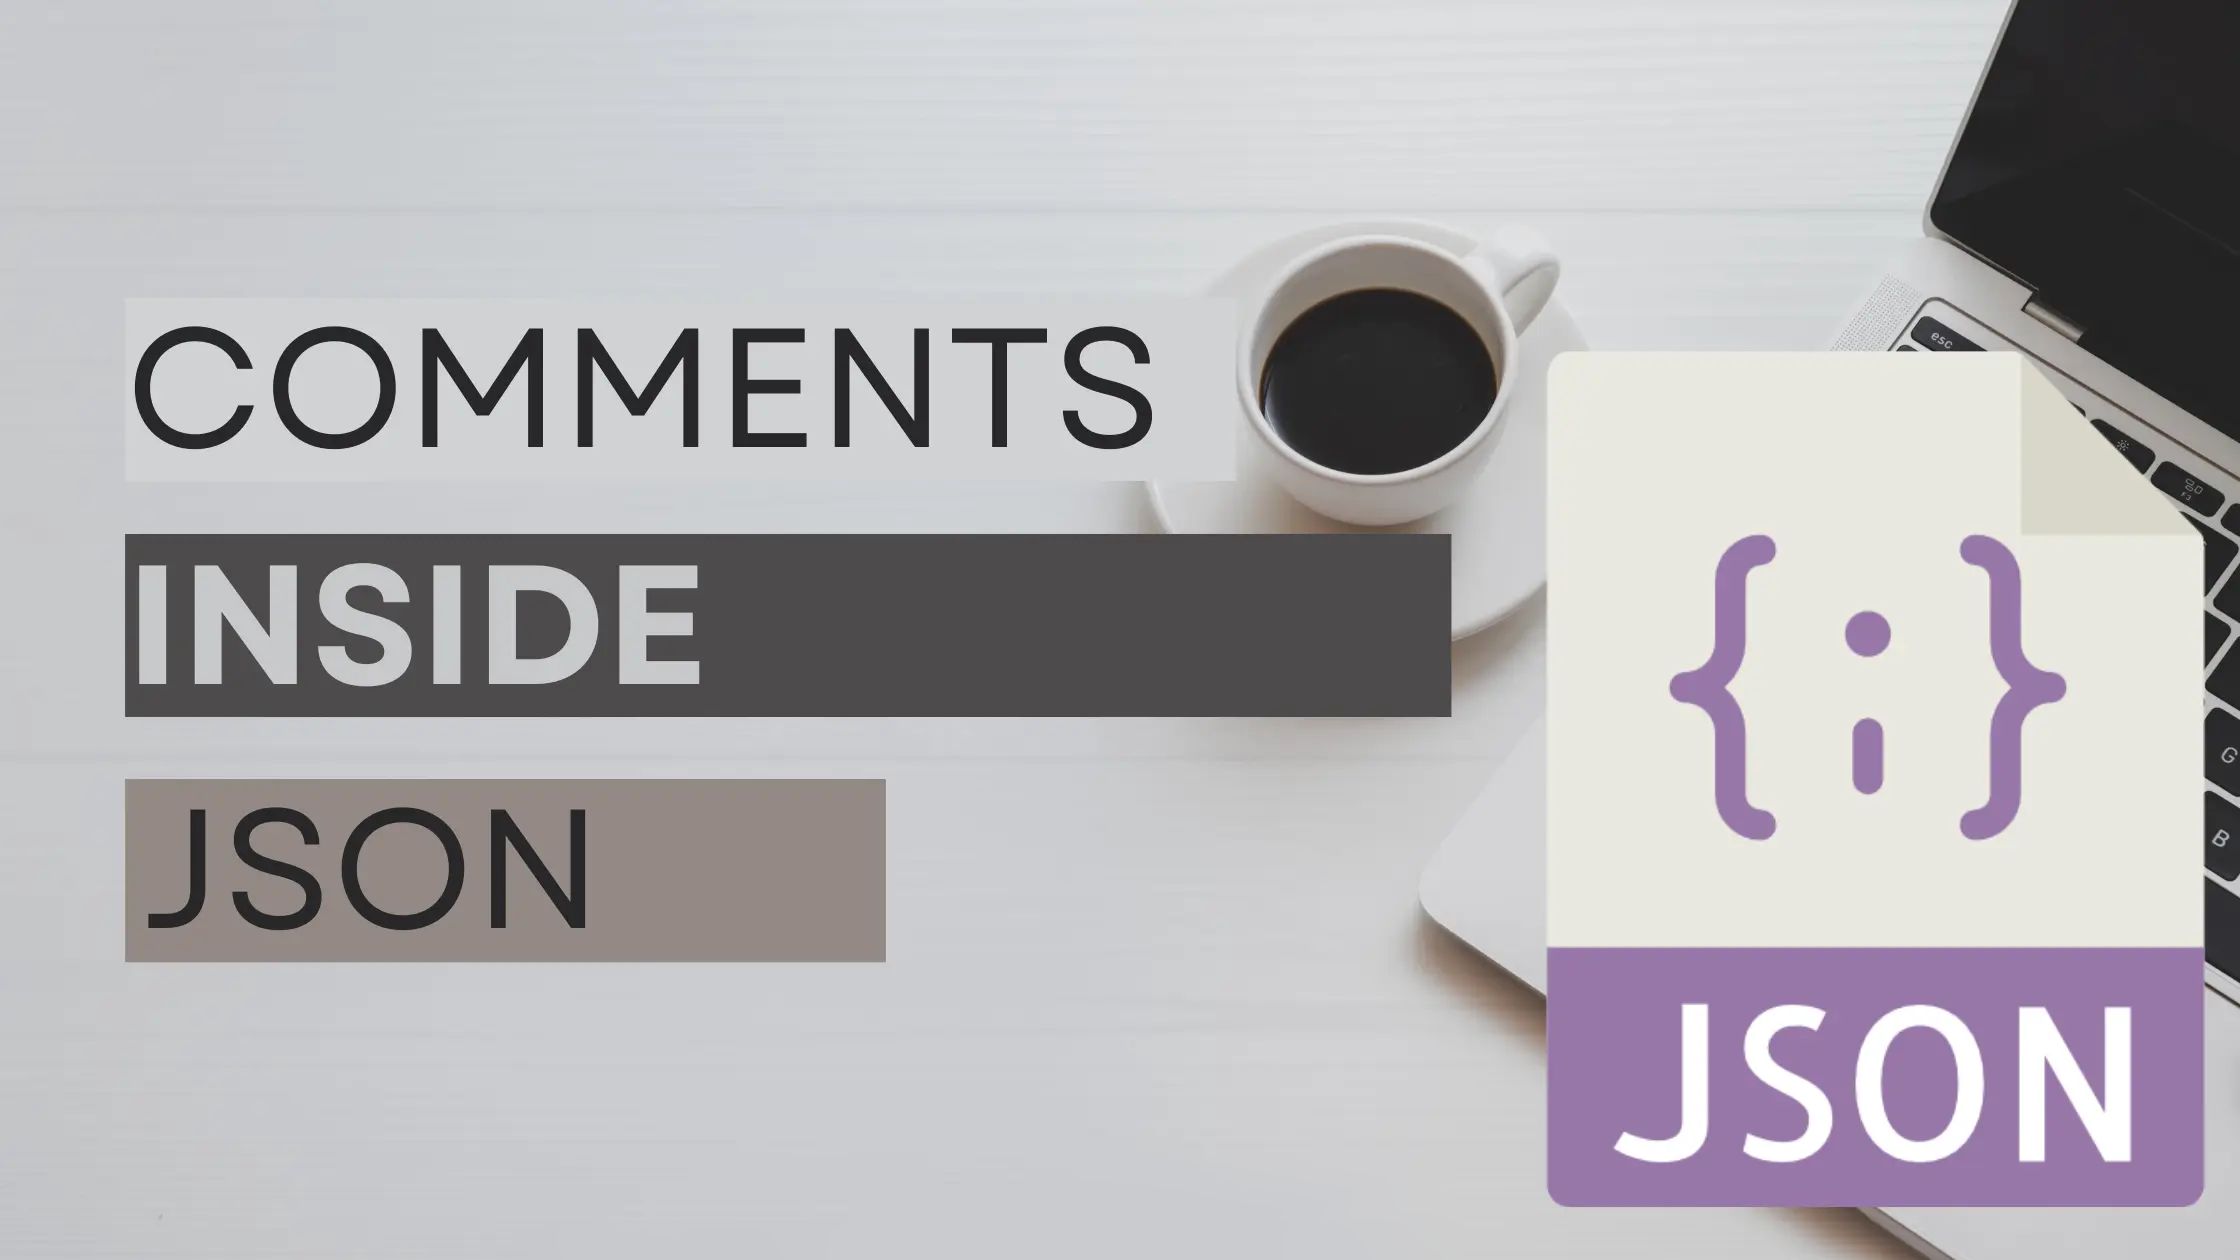 Comments in JSON: How to Add Comments to Your JSON Files